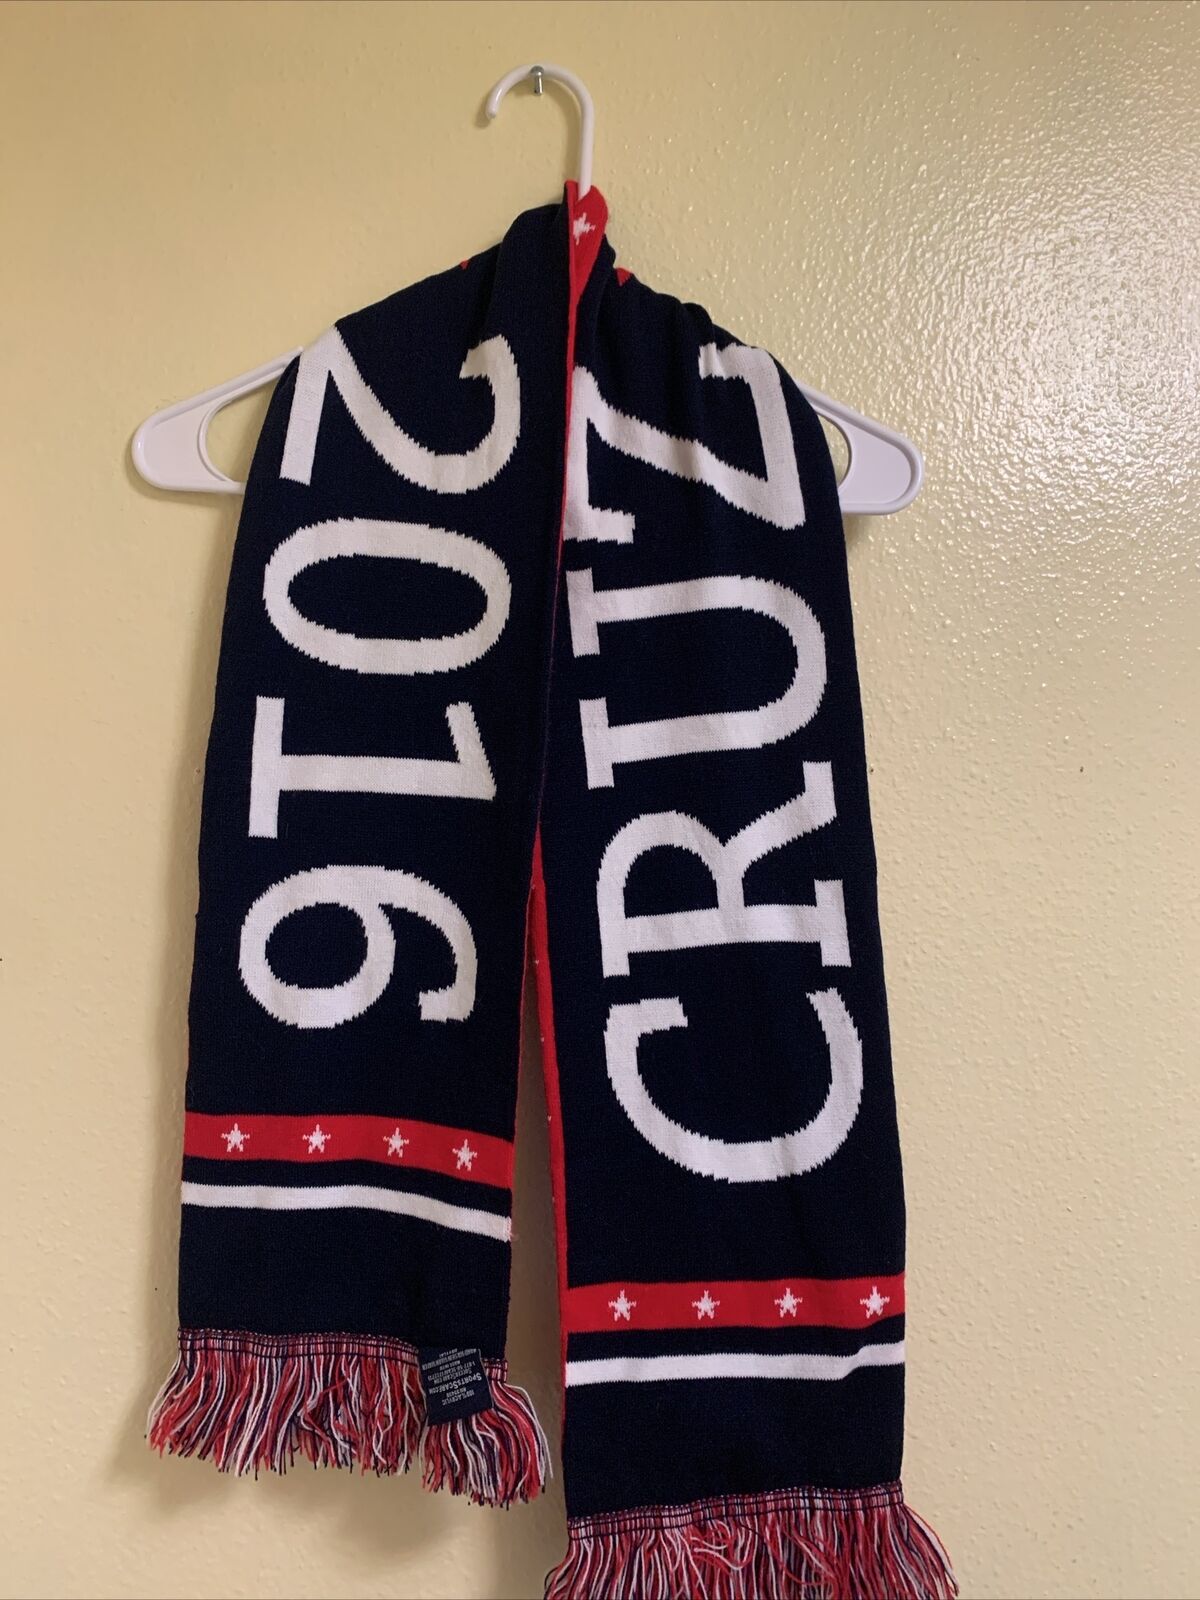 Ted Cruz 2016 Presidential Campaign Scarf Republican Courageous Conservative